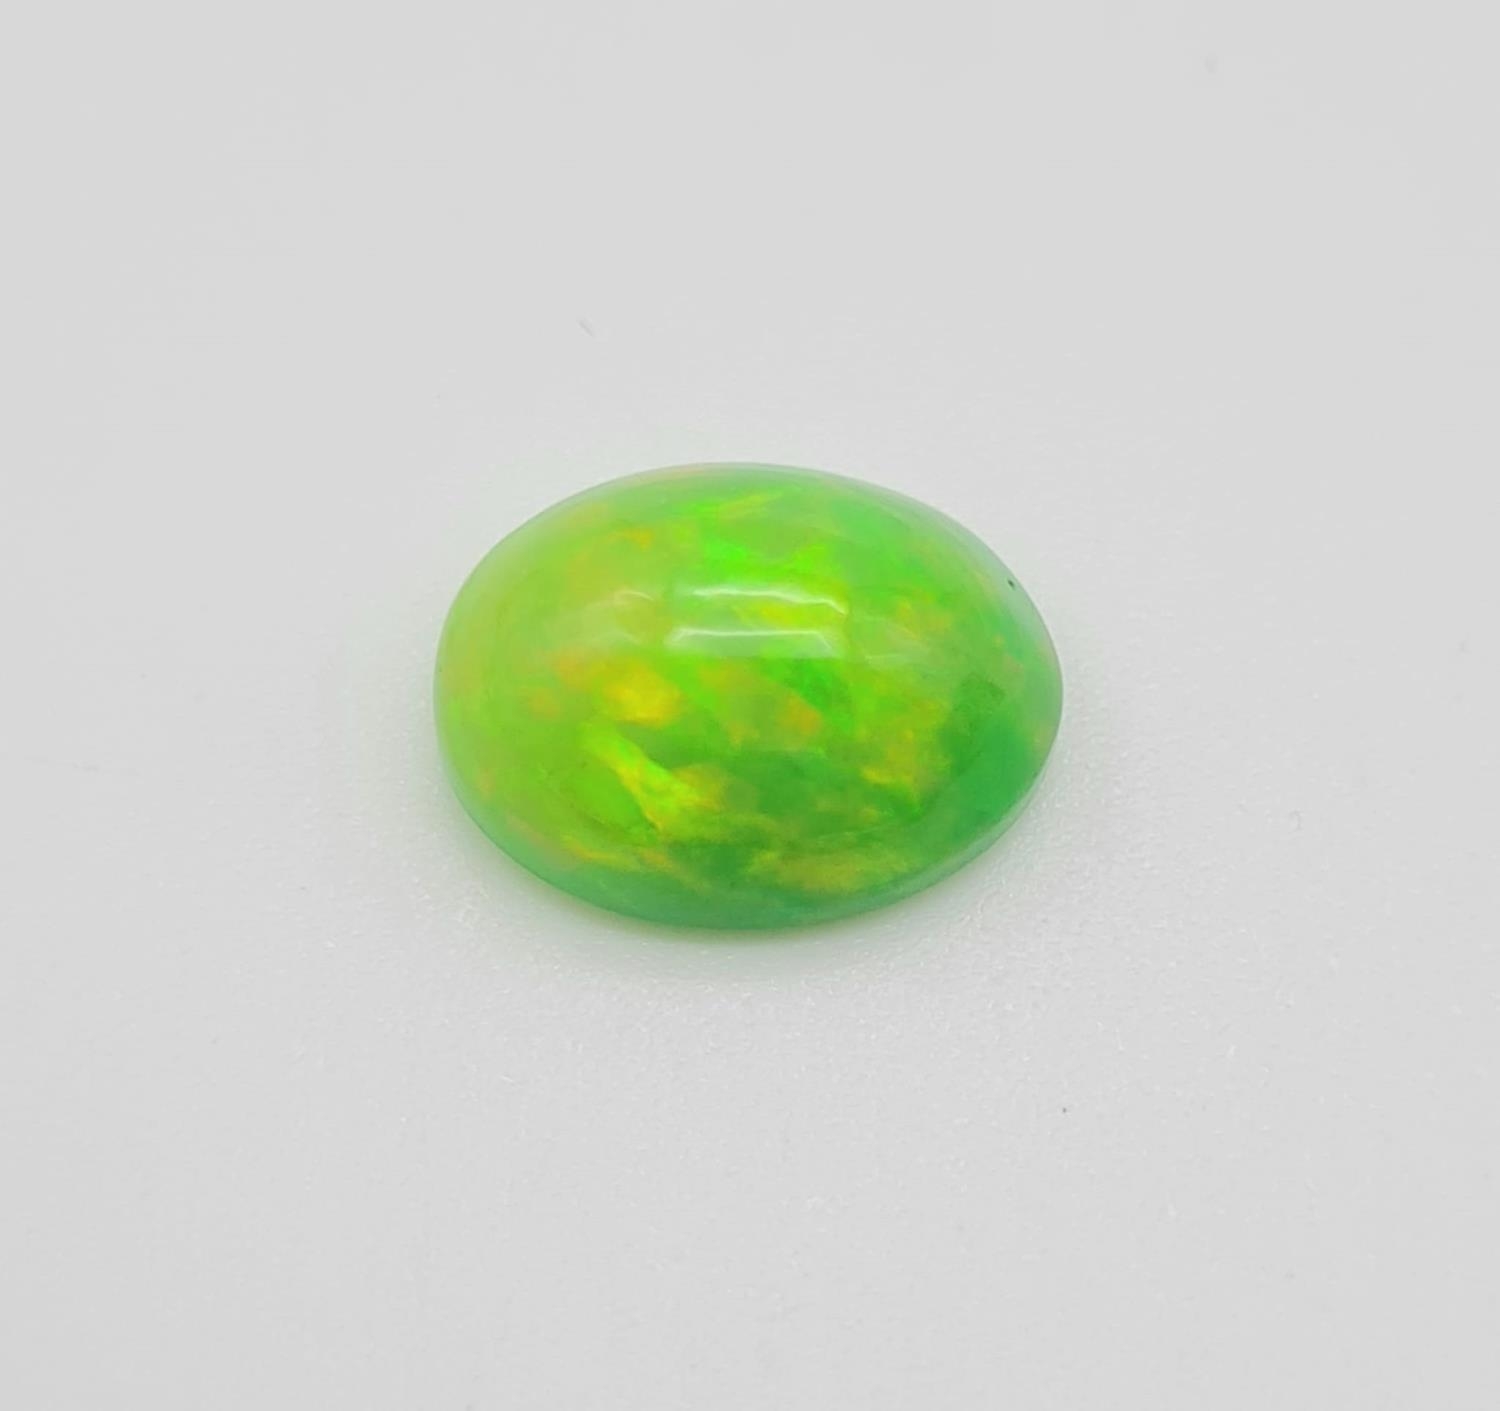 A 4.18ct Natural Green Fire Opal Gemstone in Oval Cabochon. Come with IGL&I Certificate